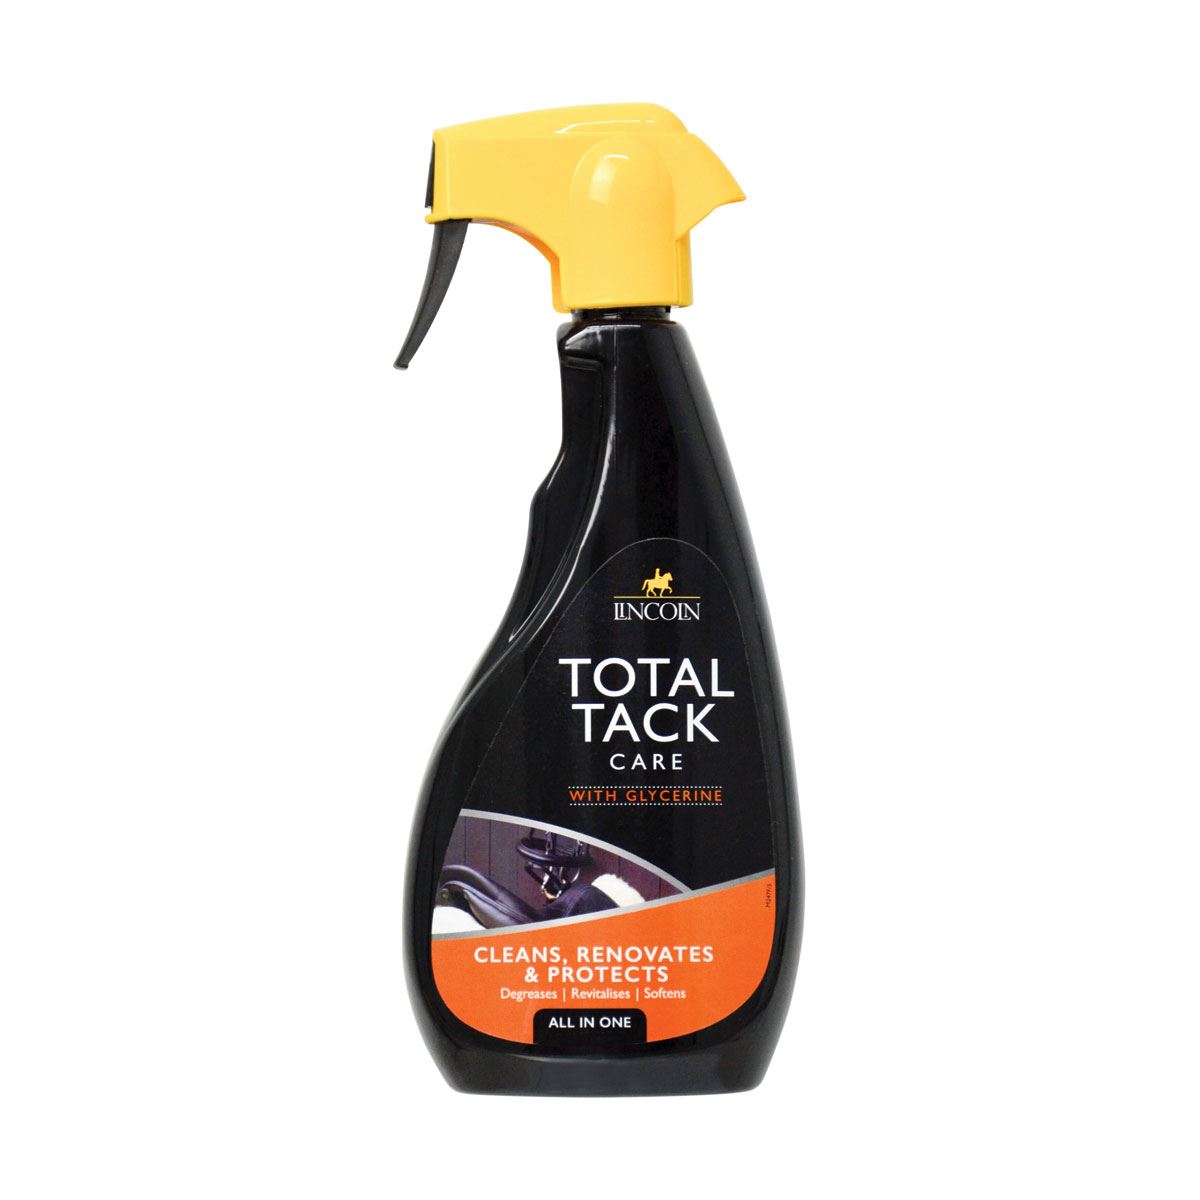 All-in-one Lincoln Total Tack Care cleaner and conditioner